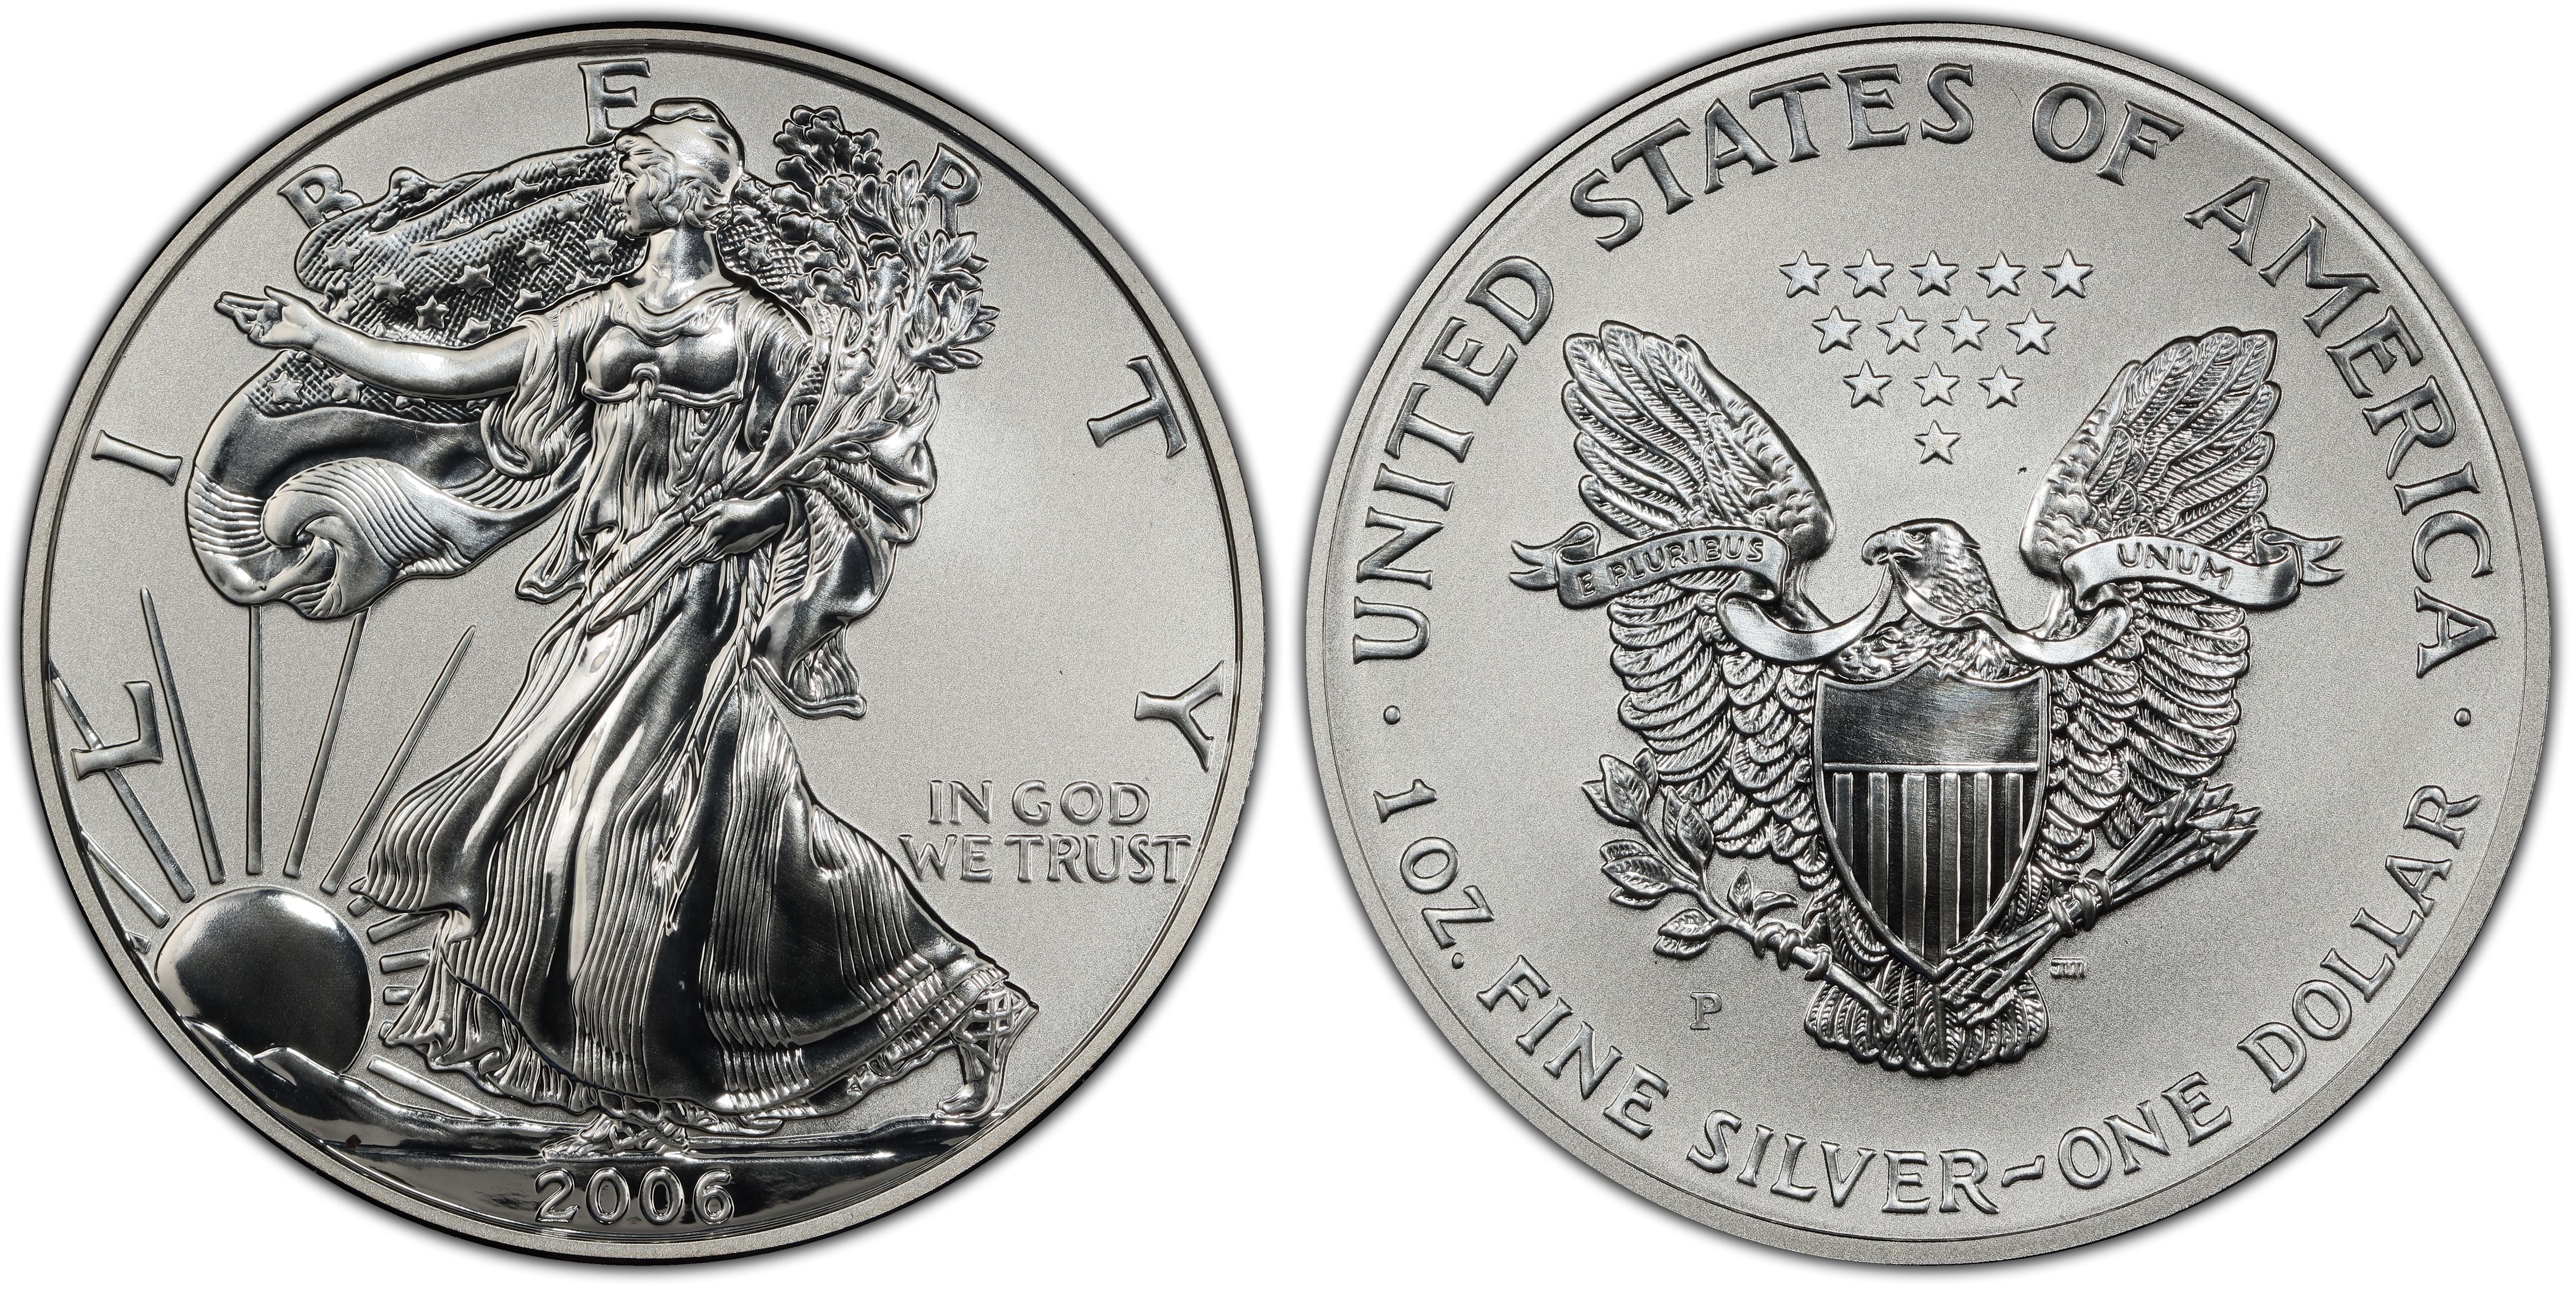 2006 P REVERSE PROOF SILVER EAGLE FROM THE 20TH ANNIVERSARY SET ONE COIN IN CAP 